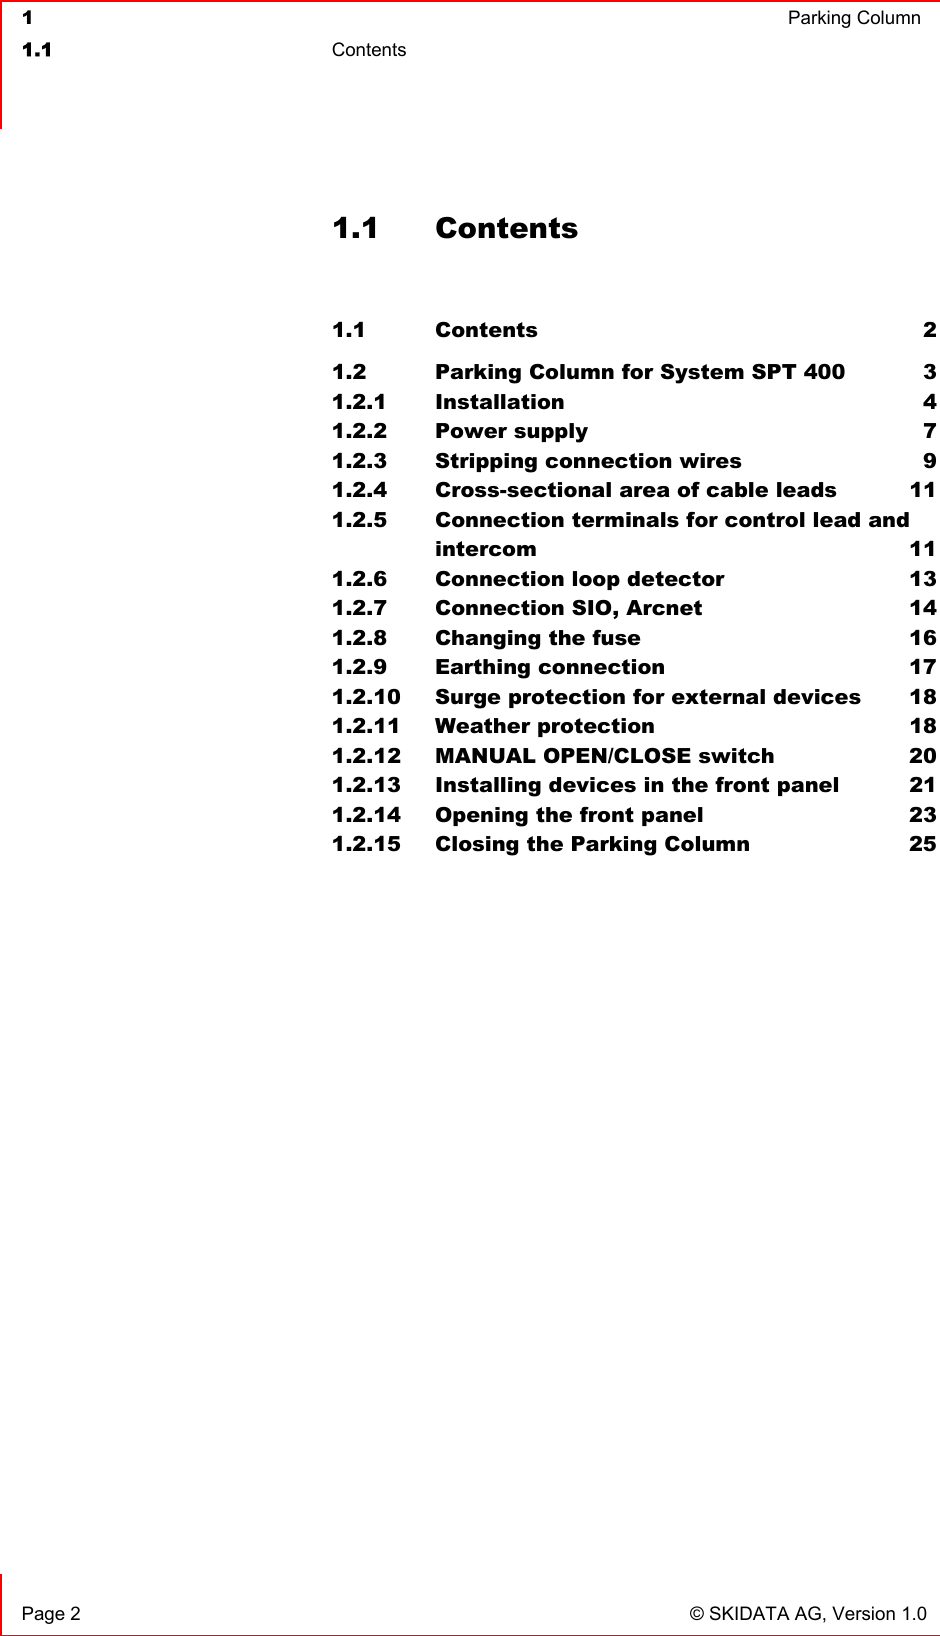  1  Parking Column1.1 Contents  Page 2  © SKIDATA AG, Version 1.0 1.1 Contents 1.1 Contents 21.2 Parking Column for System SPT 400  31.2.1 Installation 41.2.2 Power supply  71.2.3 Stripping connection wires  91.2.4 Cross-sectional area of cable leads  111.2.5 Connection terminals for control lead andintercom 111.2.6 Connection loop detector  131.2.7 Connection SIO, Arcnet  141.2.8 Changing the fuse  161.2.9 Earthing connection  171.2.10 Surge protection for external devices  181.2.11 Weather protection  181.2.12 MANUAL OPEN/CLOSE switch  201.2.13 Installing devices in the front panel  211.2.14 Opening the front panel  231.2.15 Closing the Parking Column  25